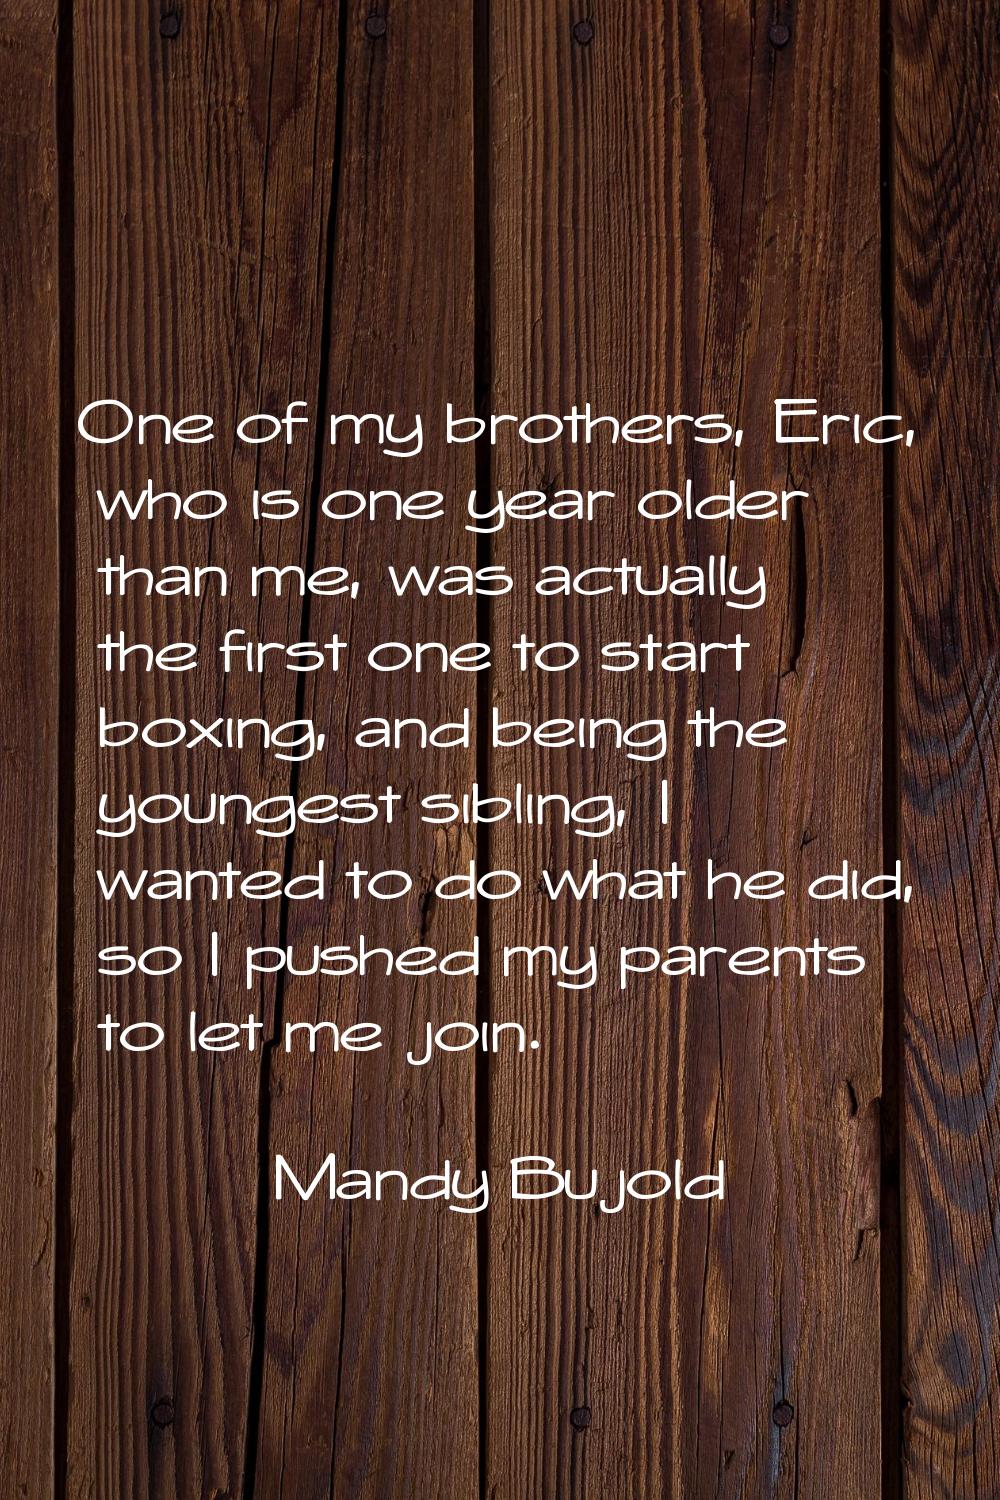 One of my brothers, Eric, who is one year older than me, was actually the first one to start boxing